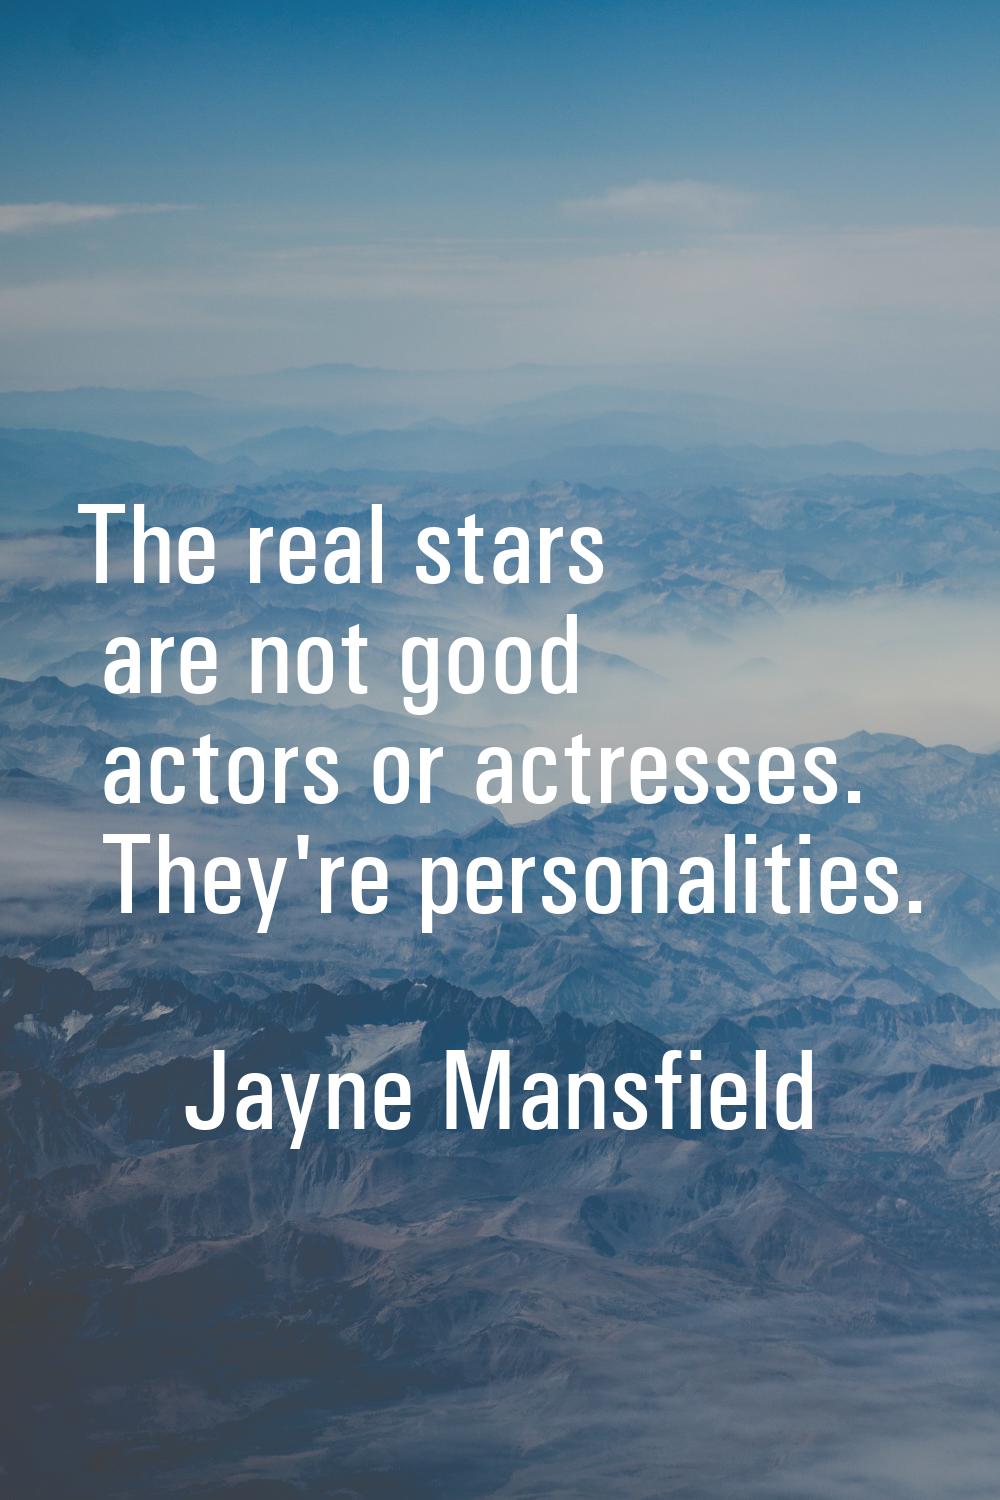 The real stars are not good actors or actresses. They're personalities.